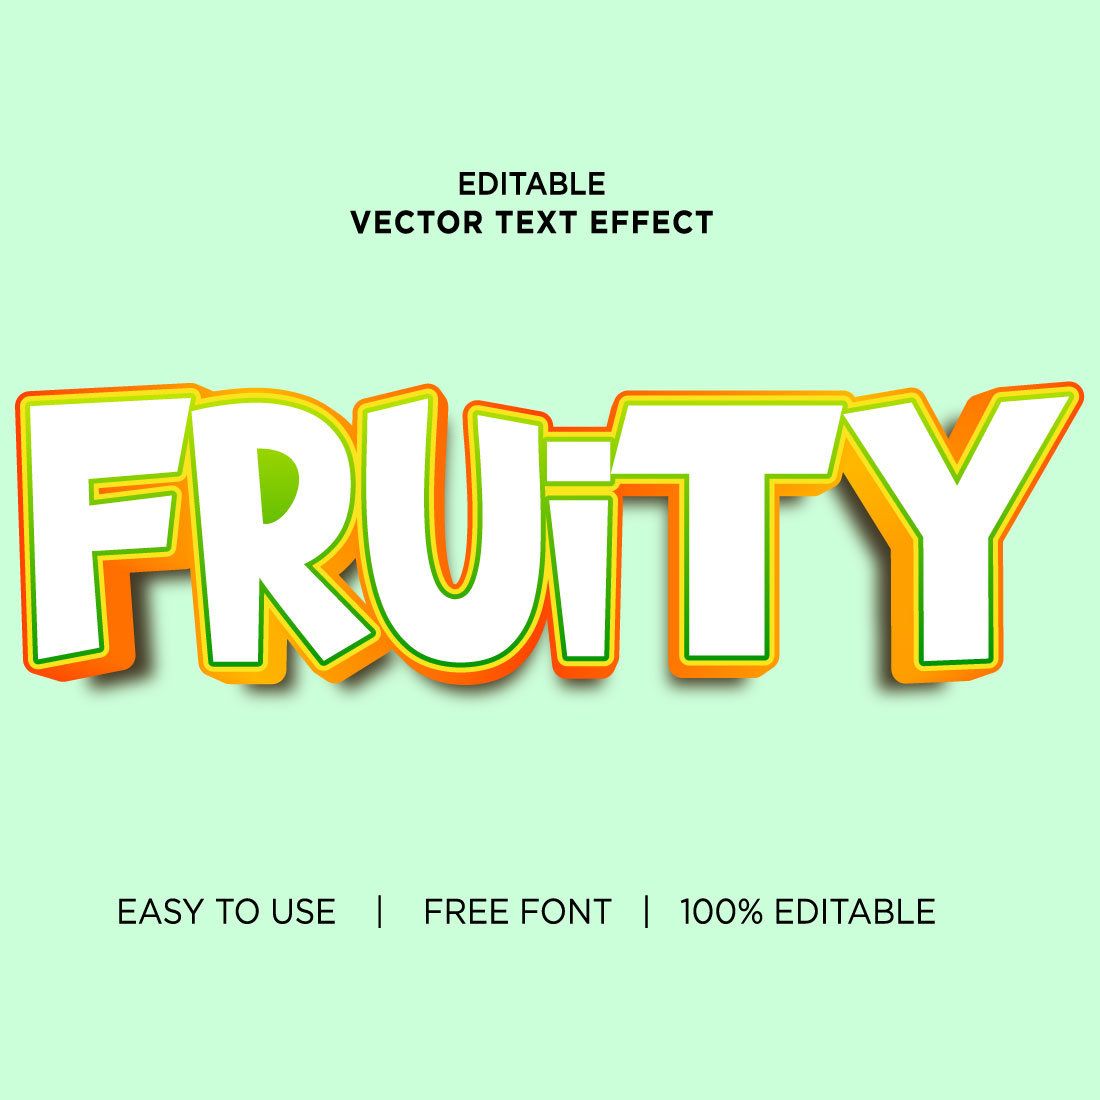 Fruity 3d text effects vector illustrations New Text style eps files editable text effect vector, 3d editable text effect vector, editable font effect vector, preview image.